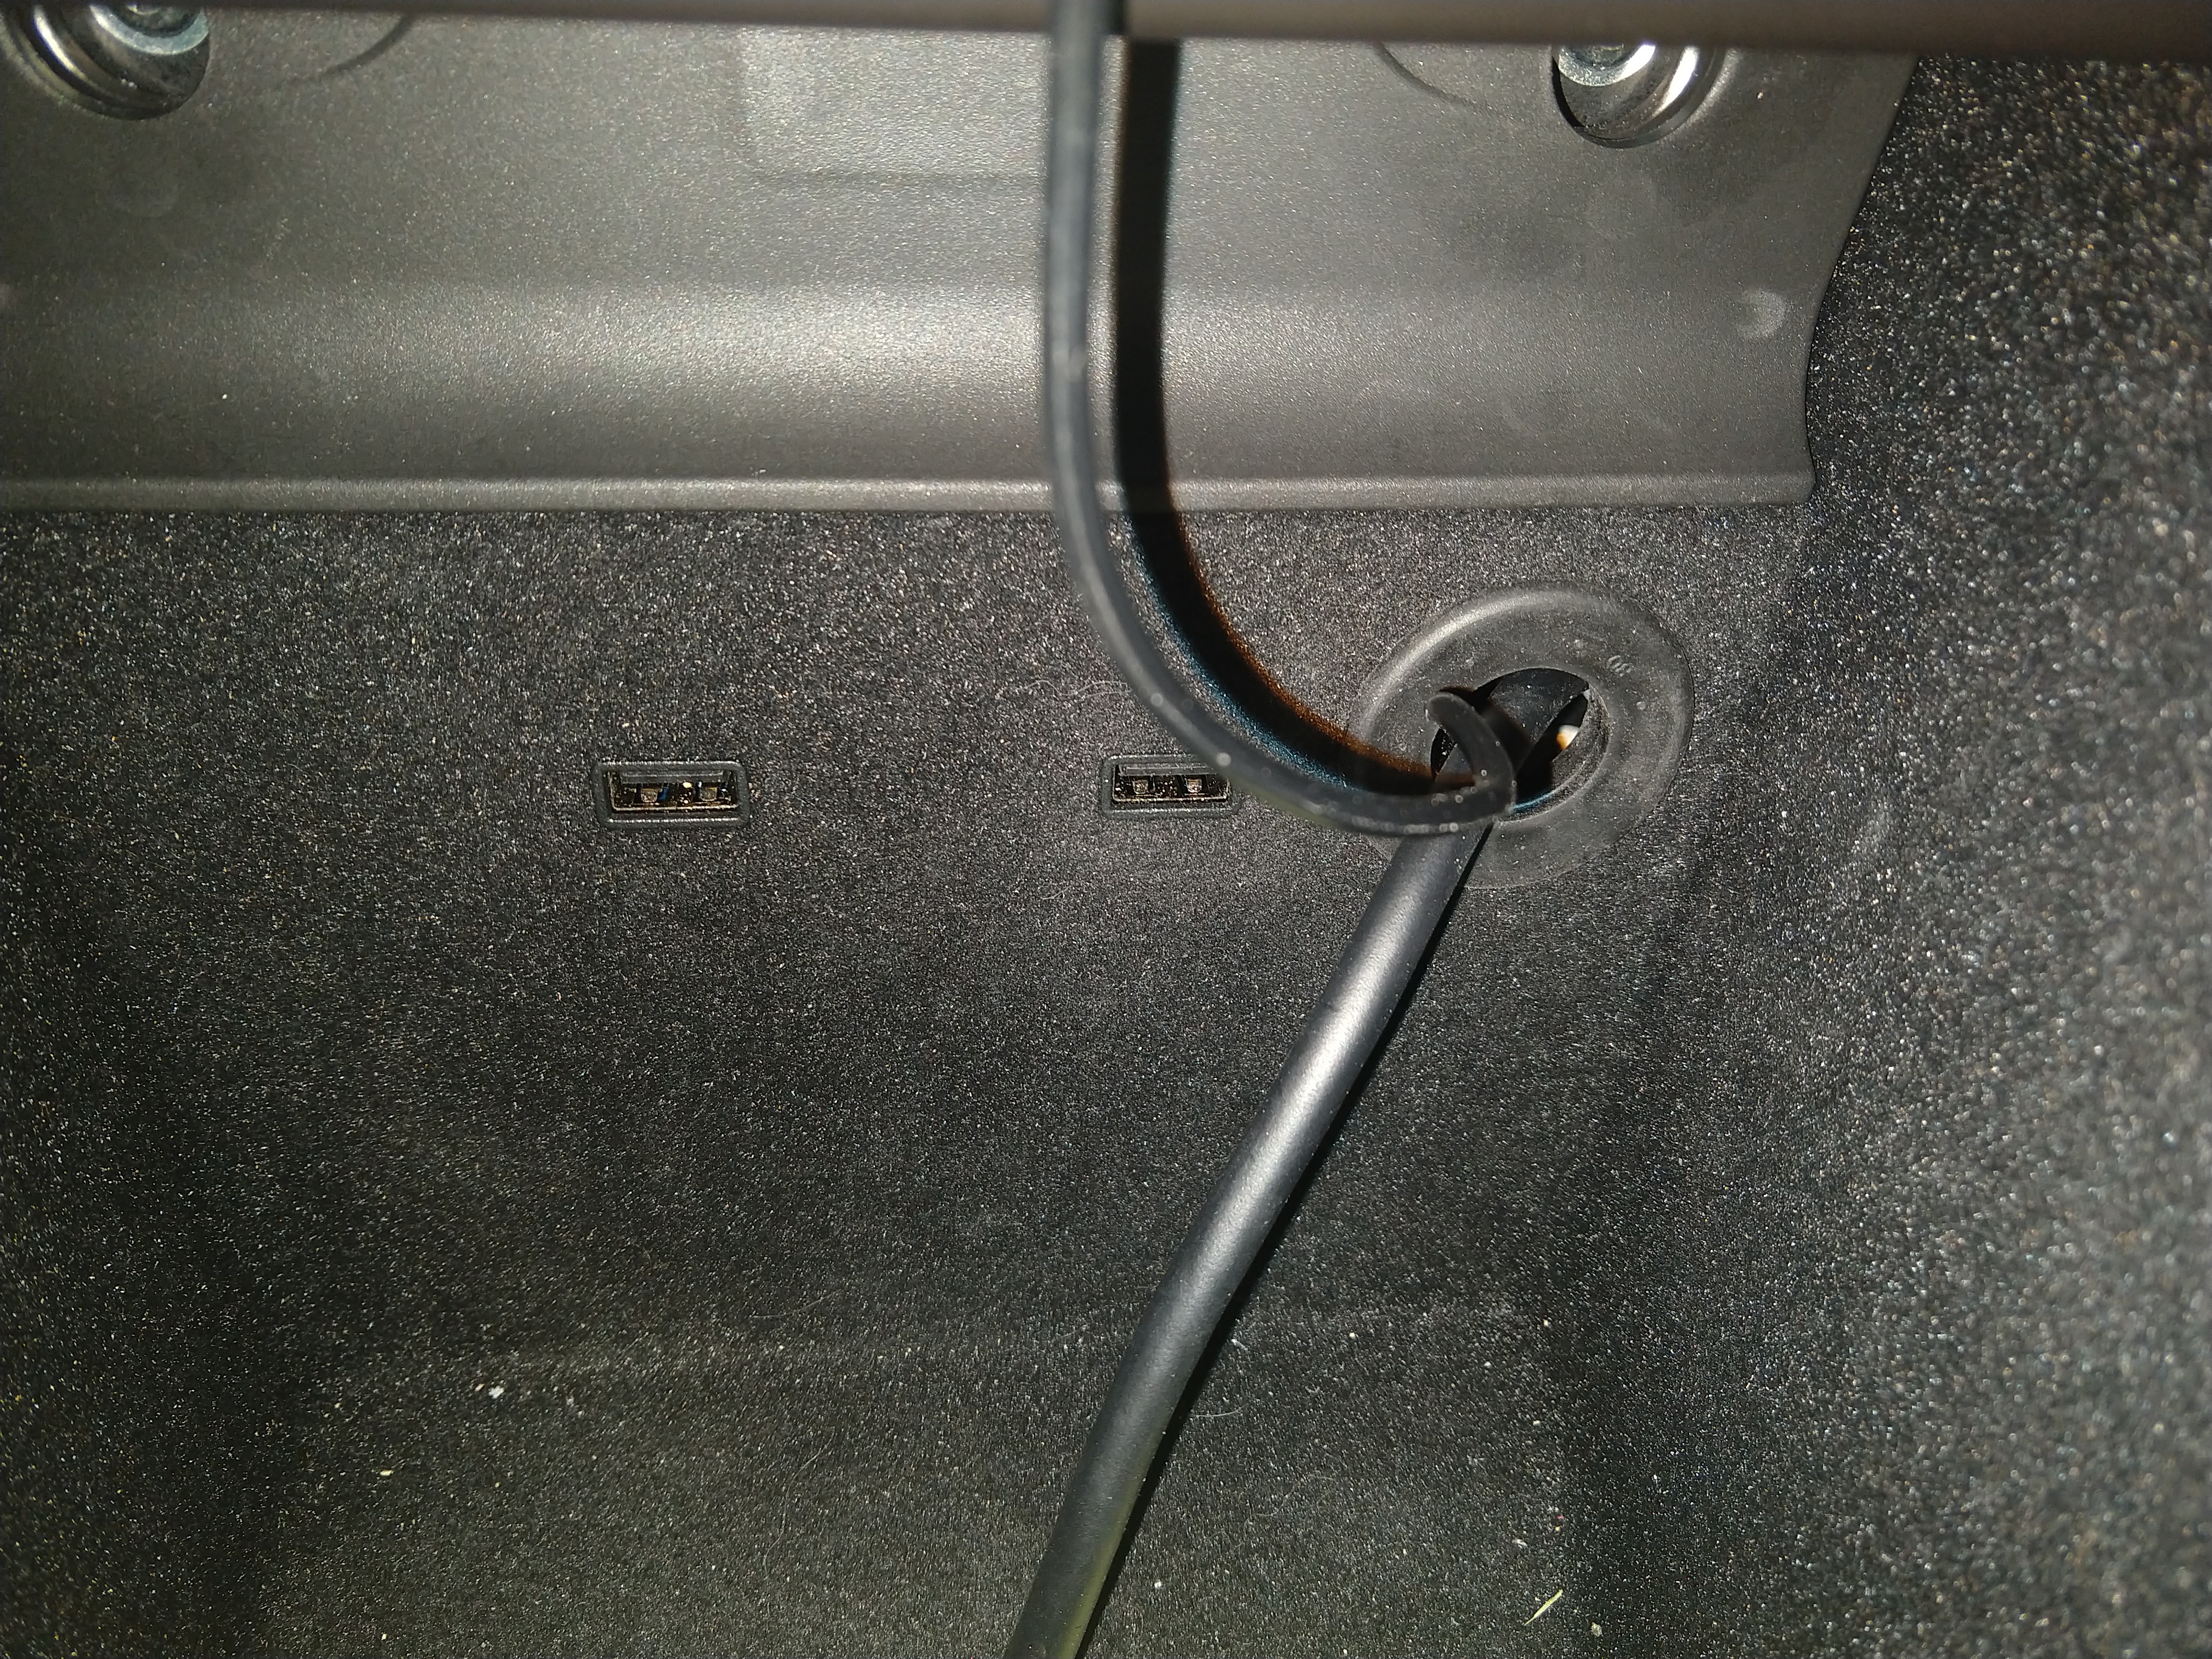 grommeted hole through center console